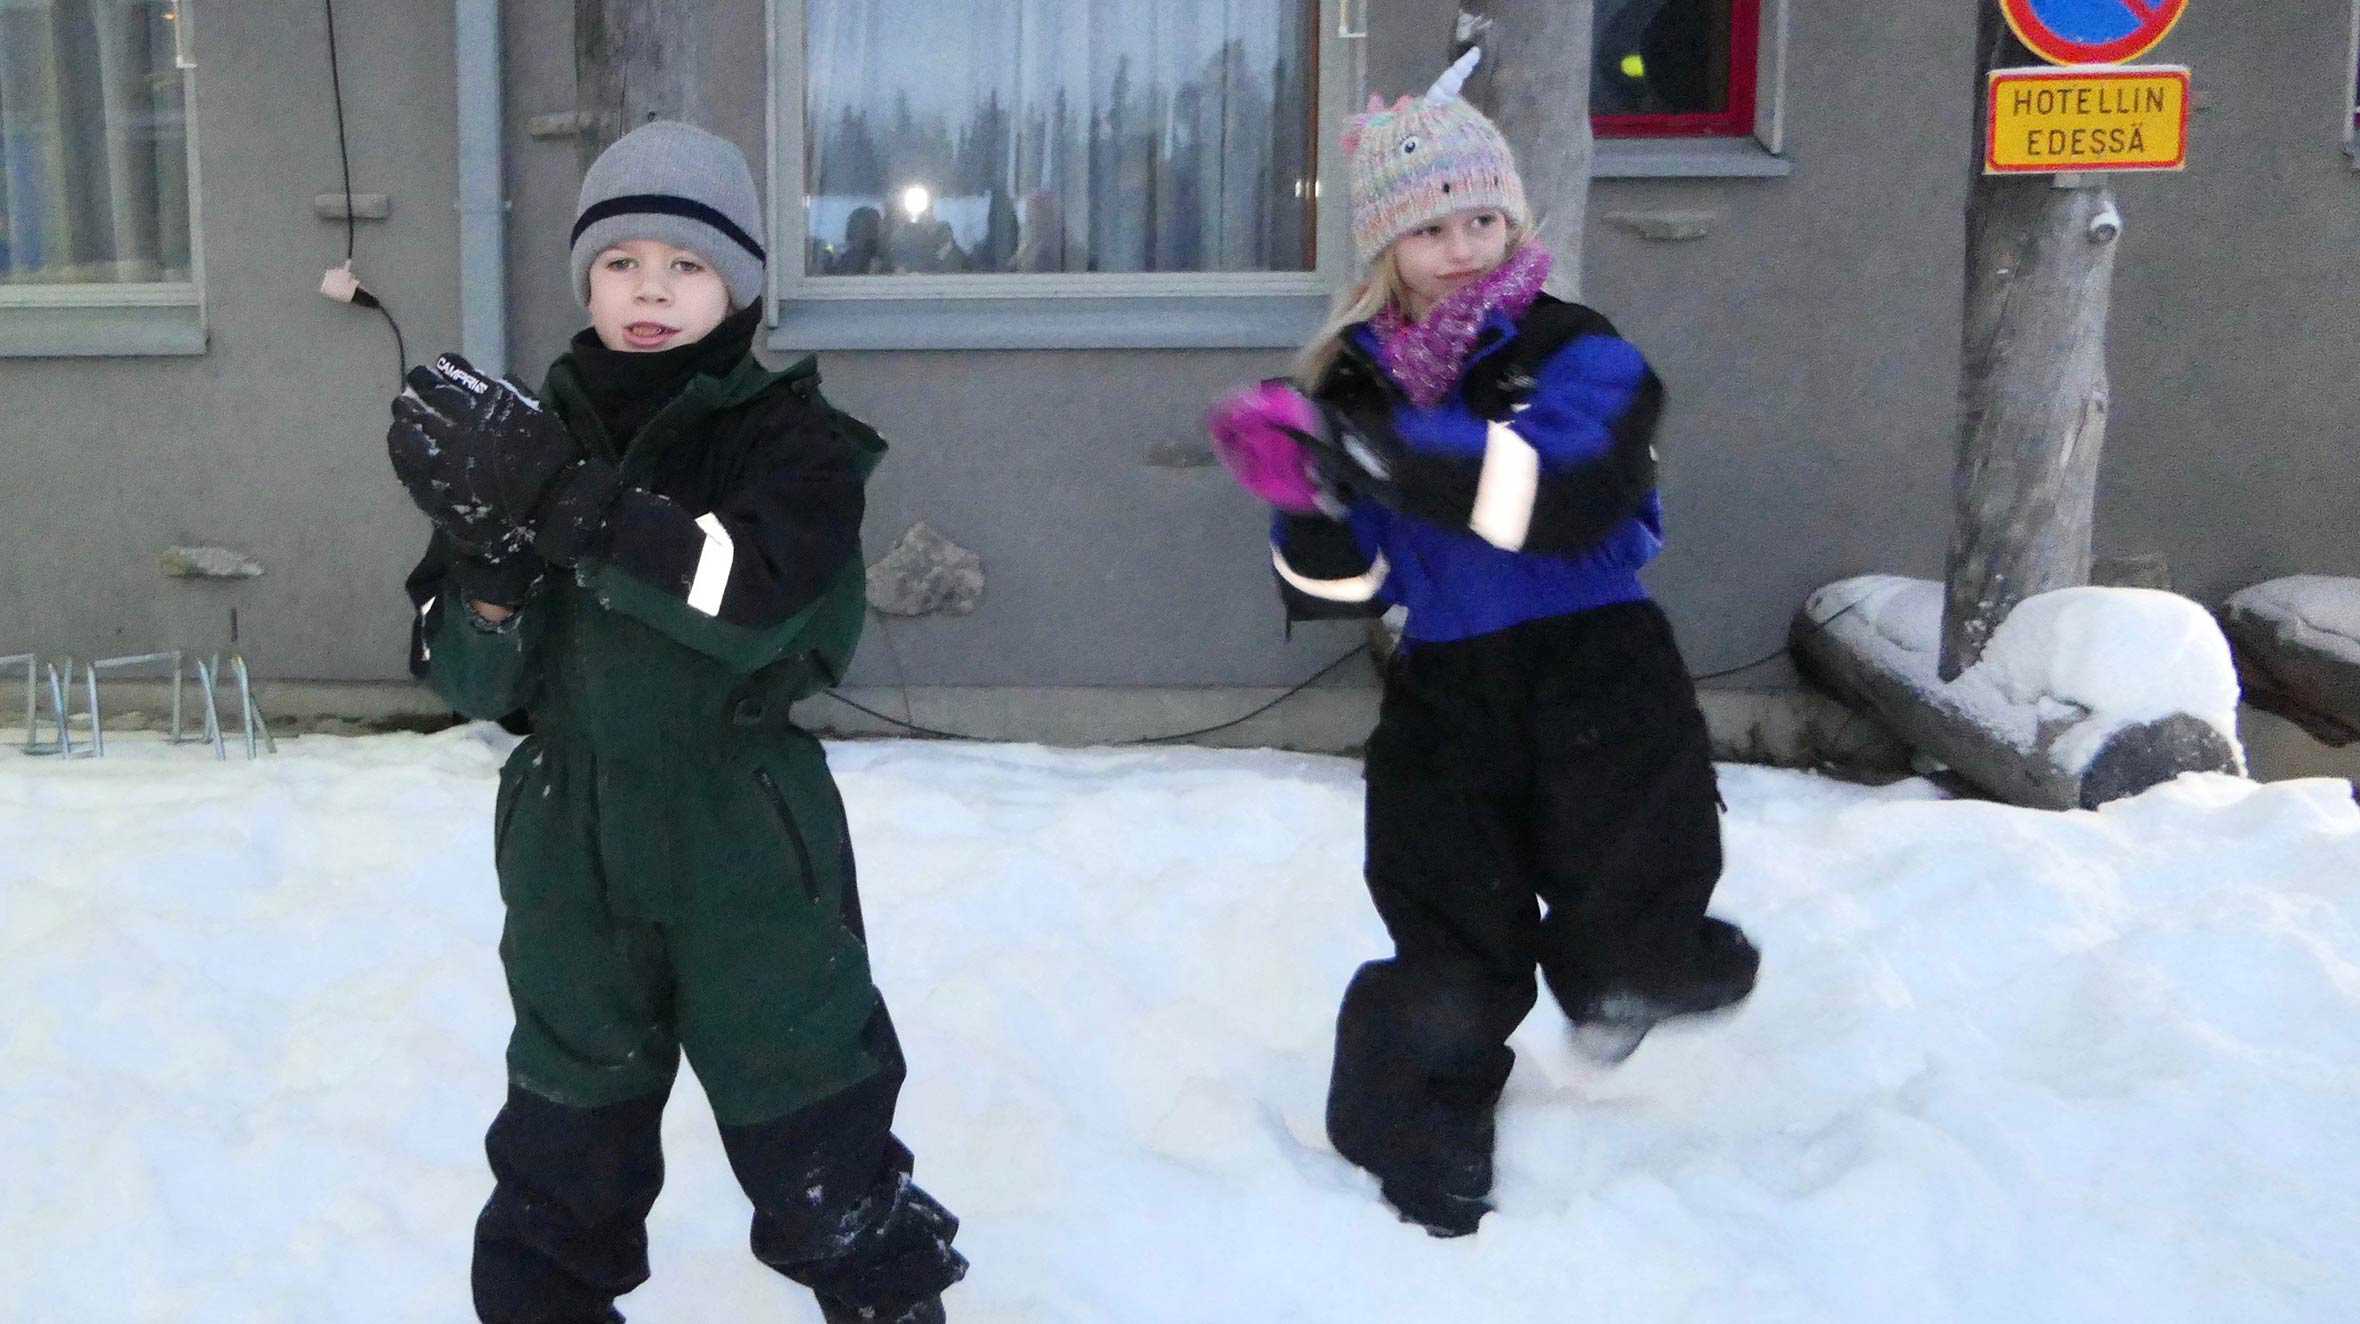 Robbie and his sister, Annabelle playing in the snow during their trip to Lapland